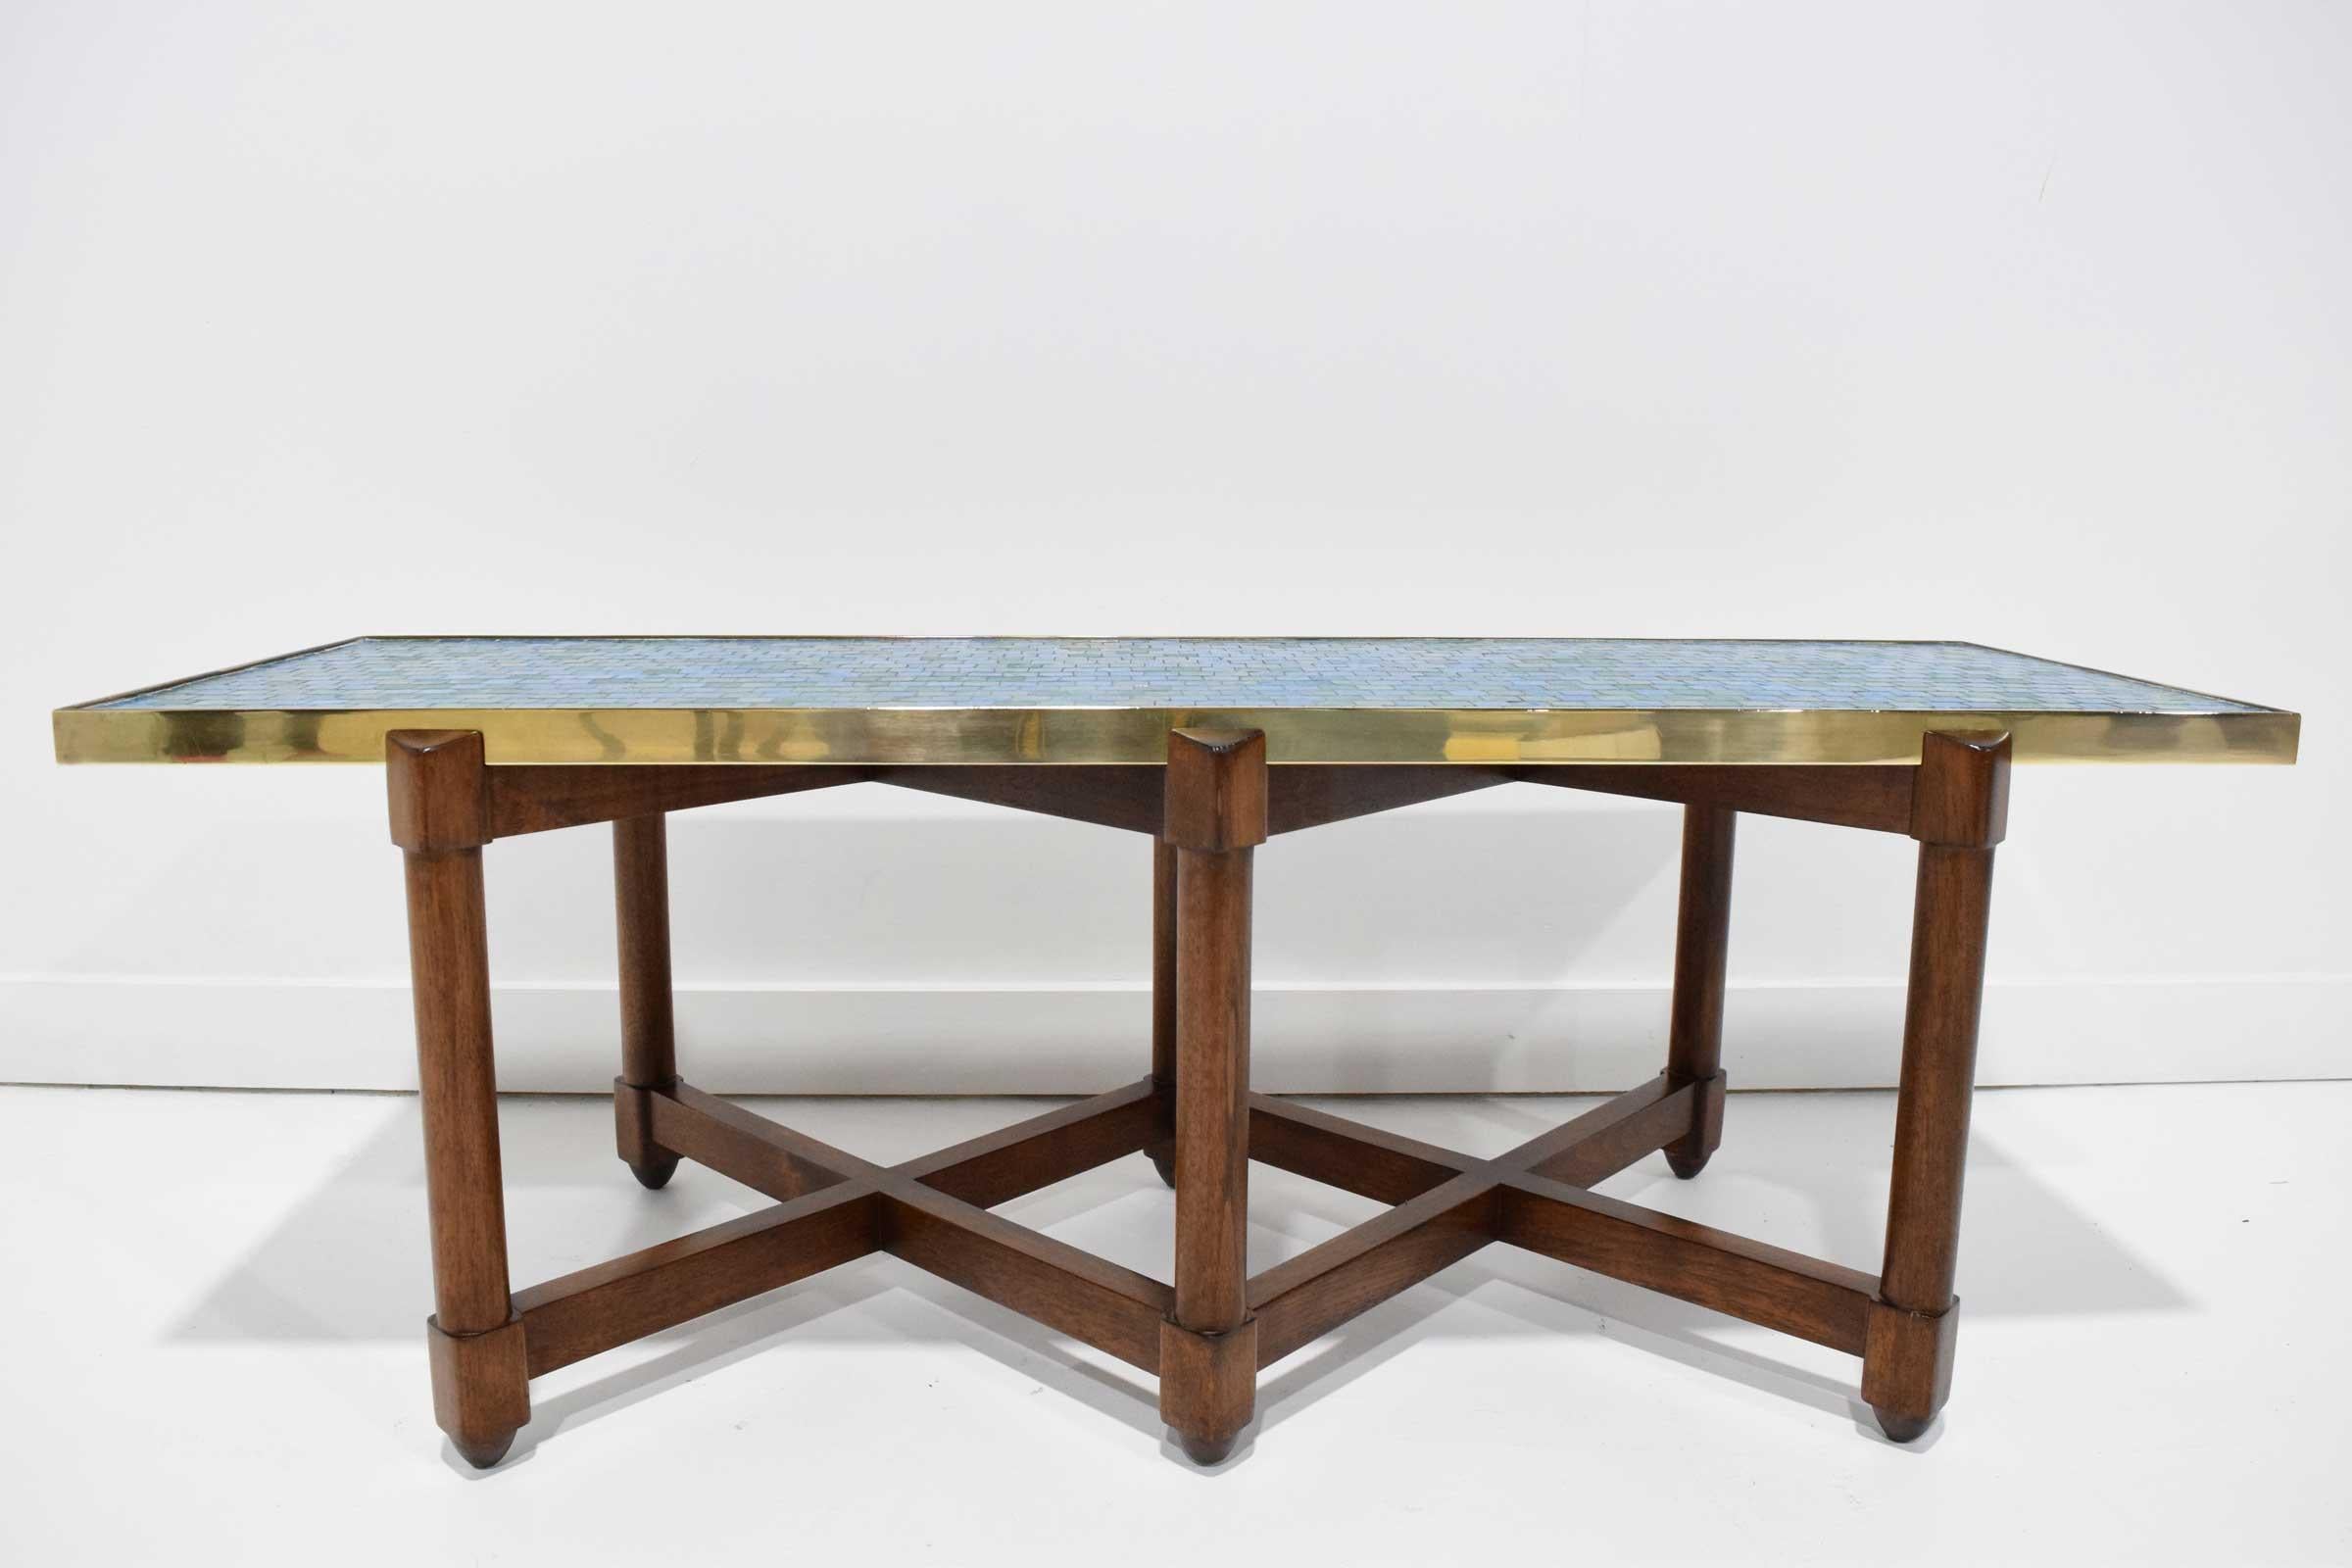 North American Edward Wormley for Dunbar Cocktail Table with Glass Tile Top and Brass Trim For Sale